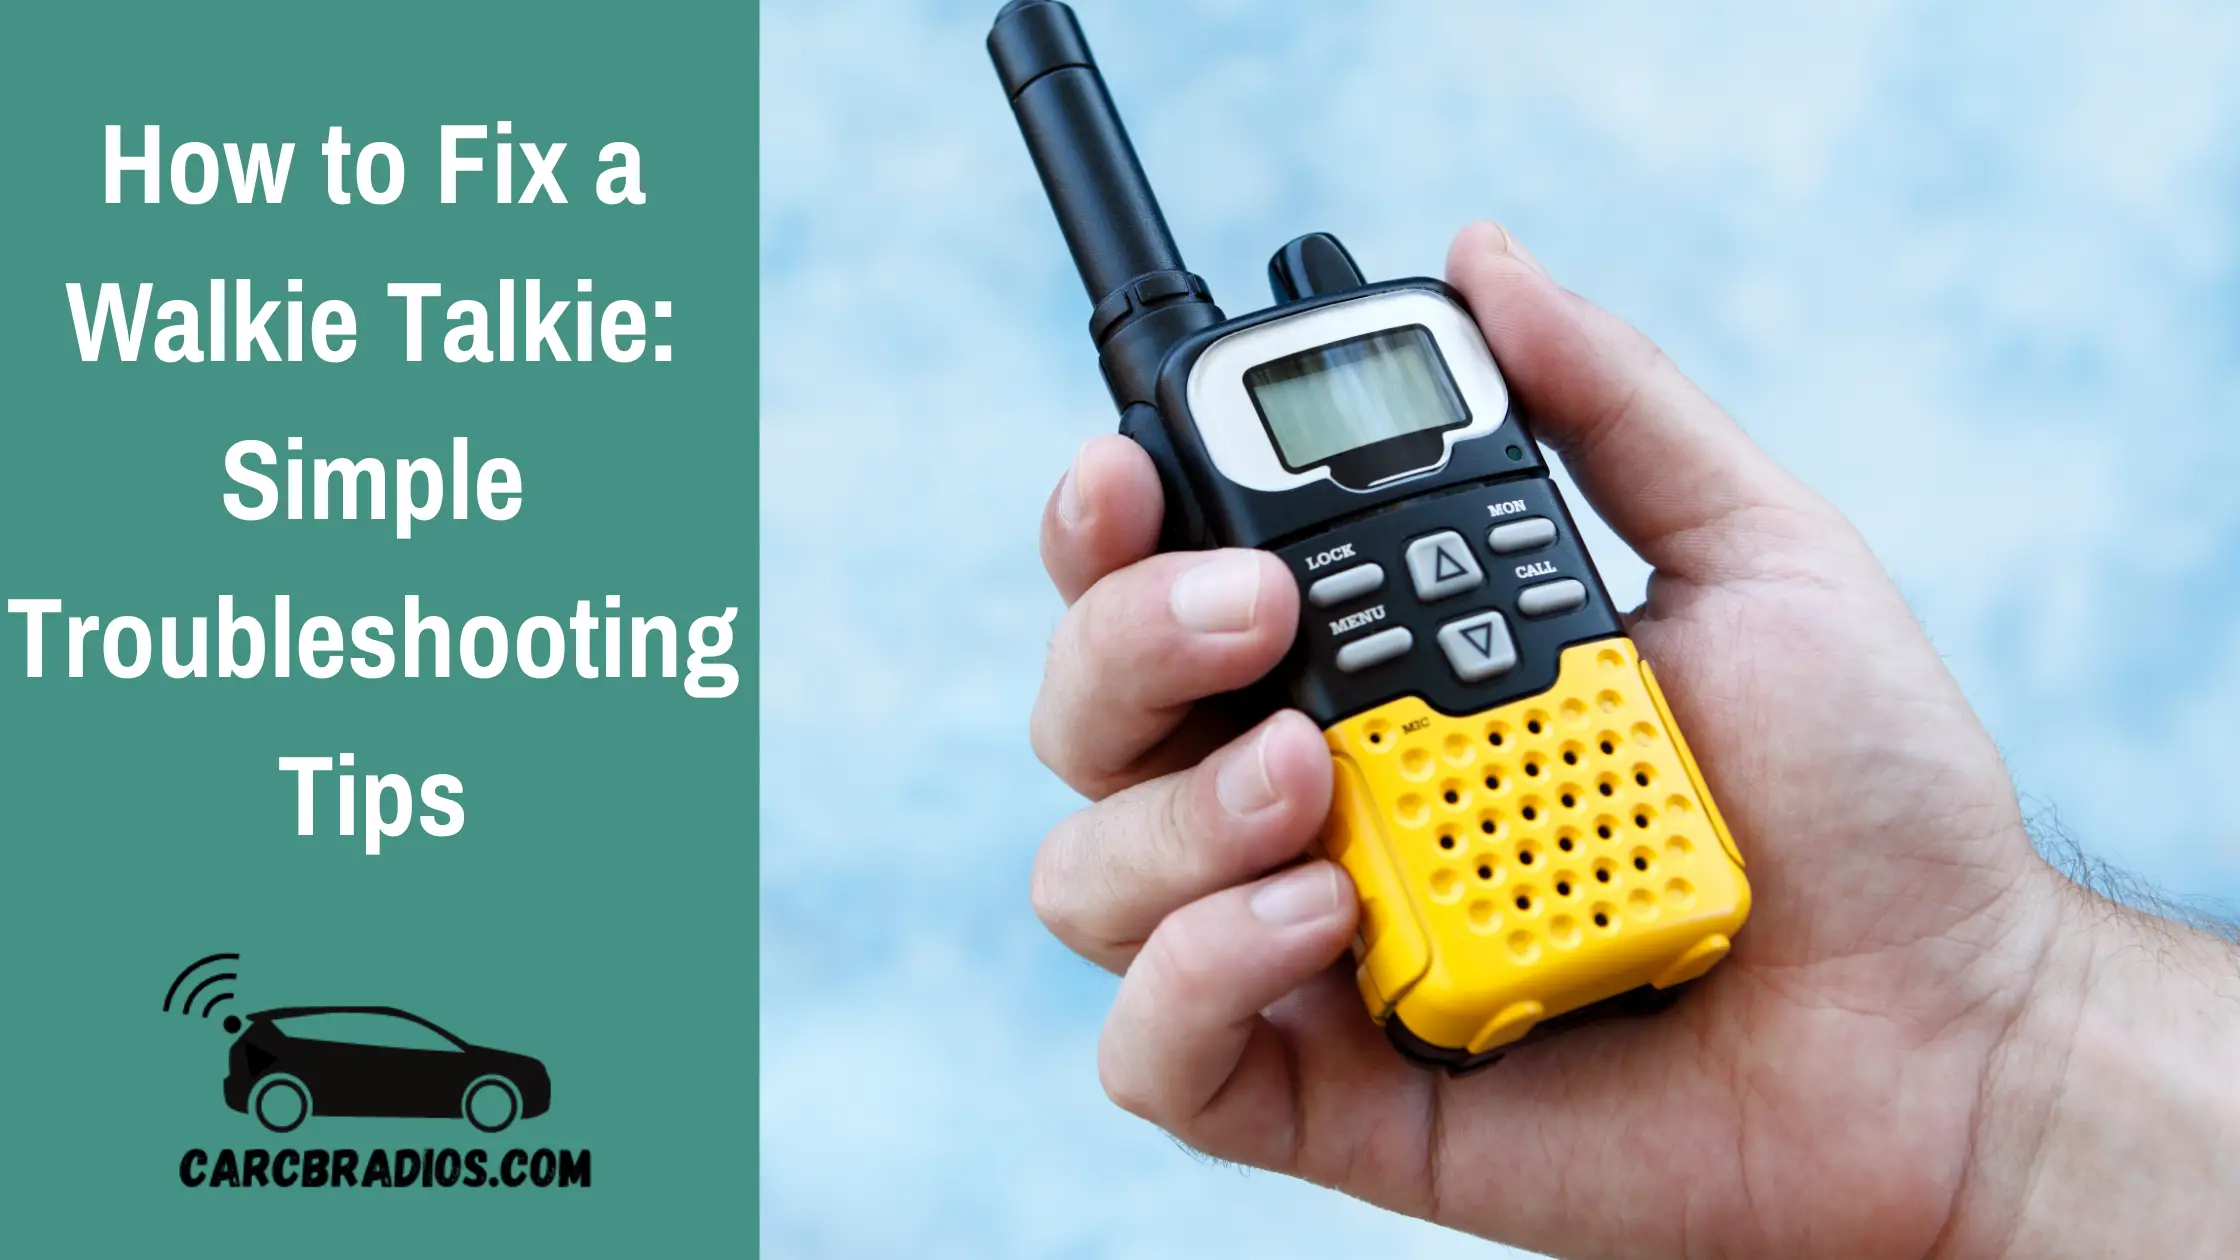 In this article, I will provide some common walkie talkie errors and troubleshooting tips to help you fix any issues you may encounter. Whether you are a seasoned walkie talkie user or just starting out, this article will provide valuable information to ensure that your communication stays clear and uninterrupted.